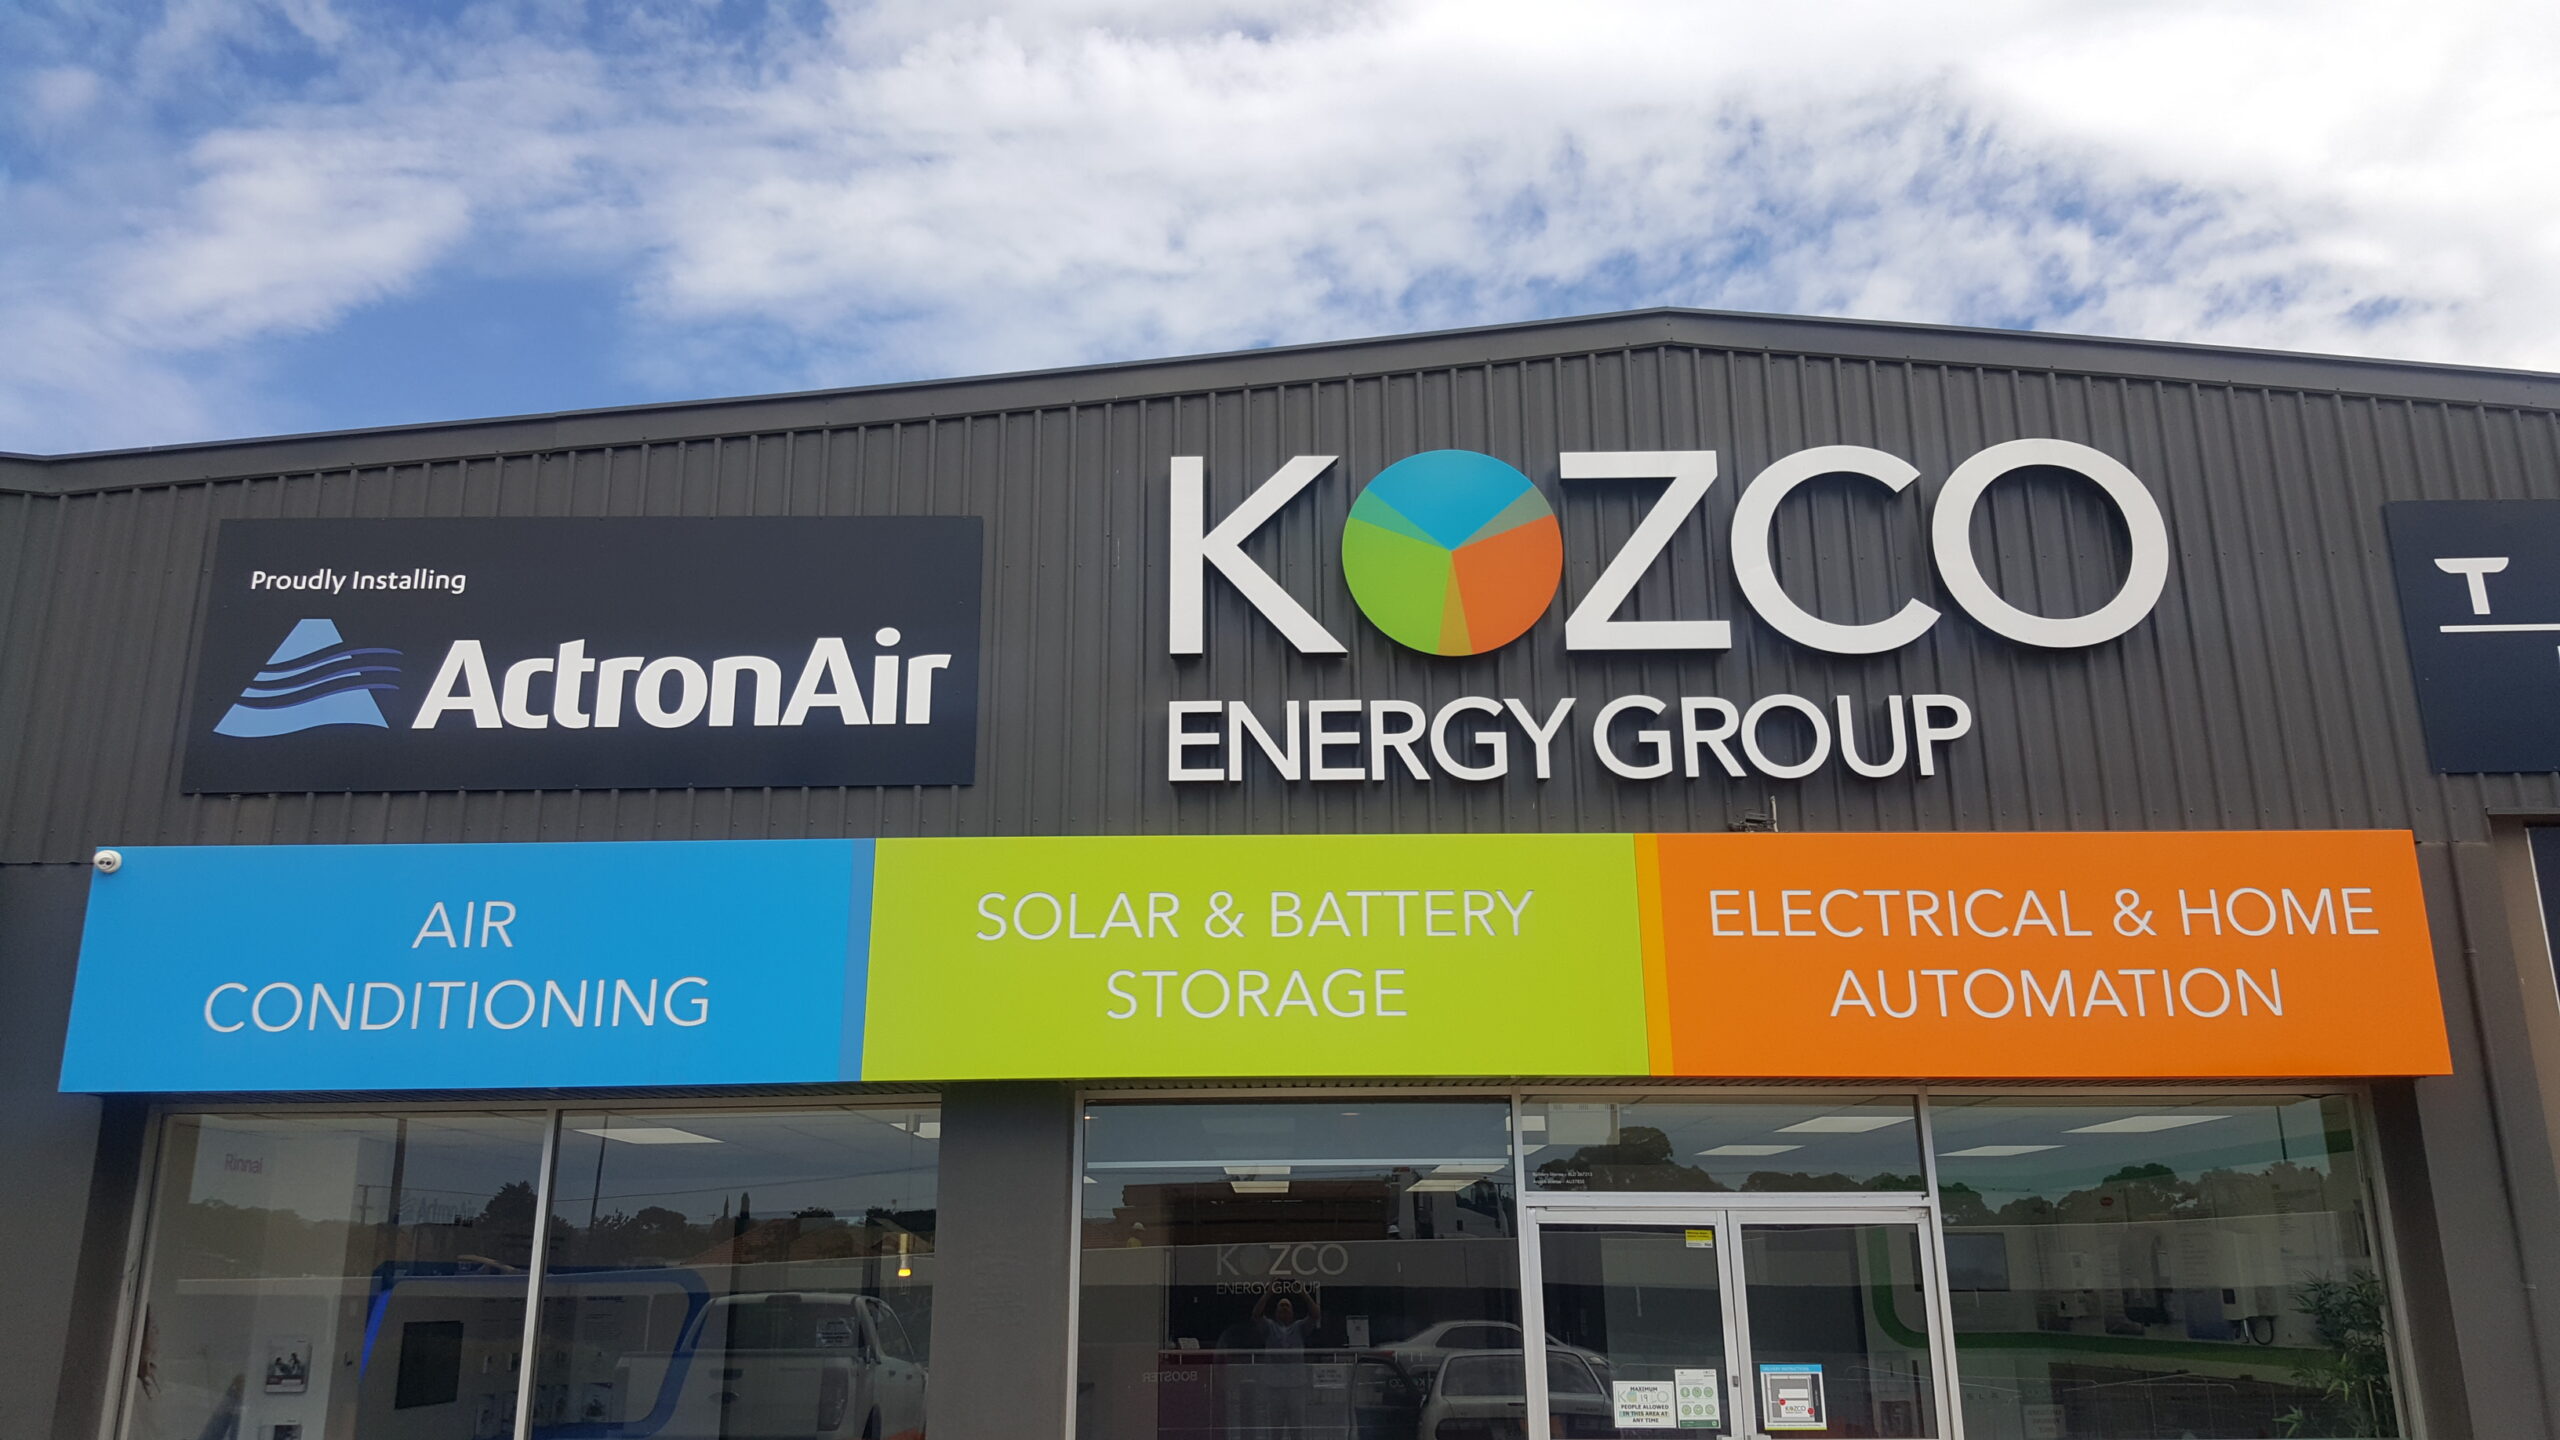 custom printed metal signs installed on front fascia of business Adelaide